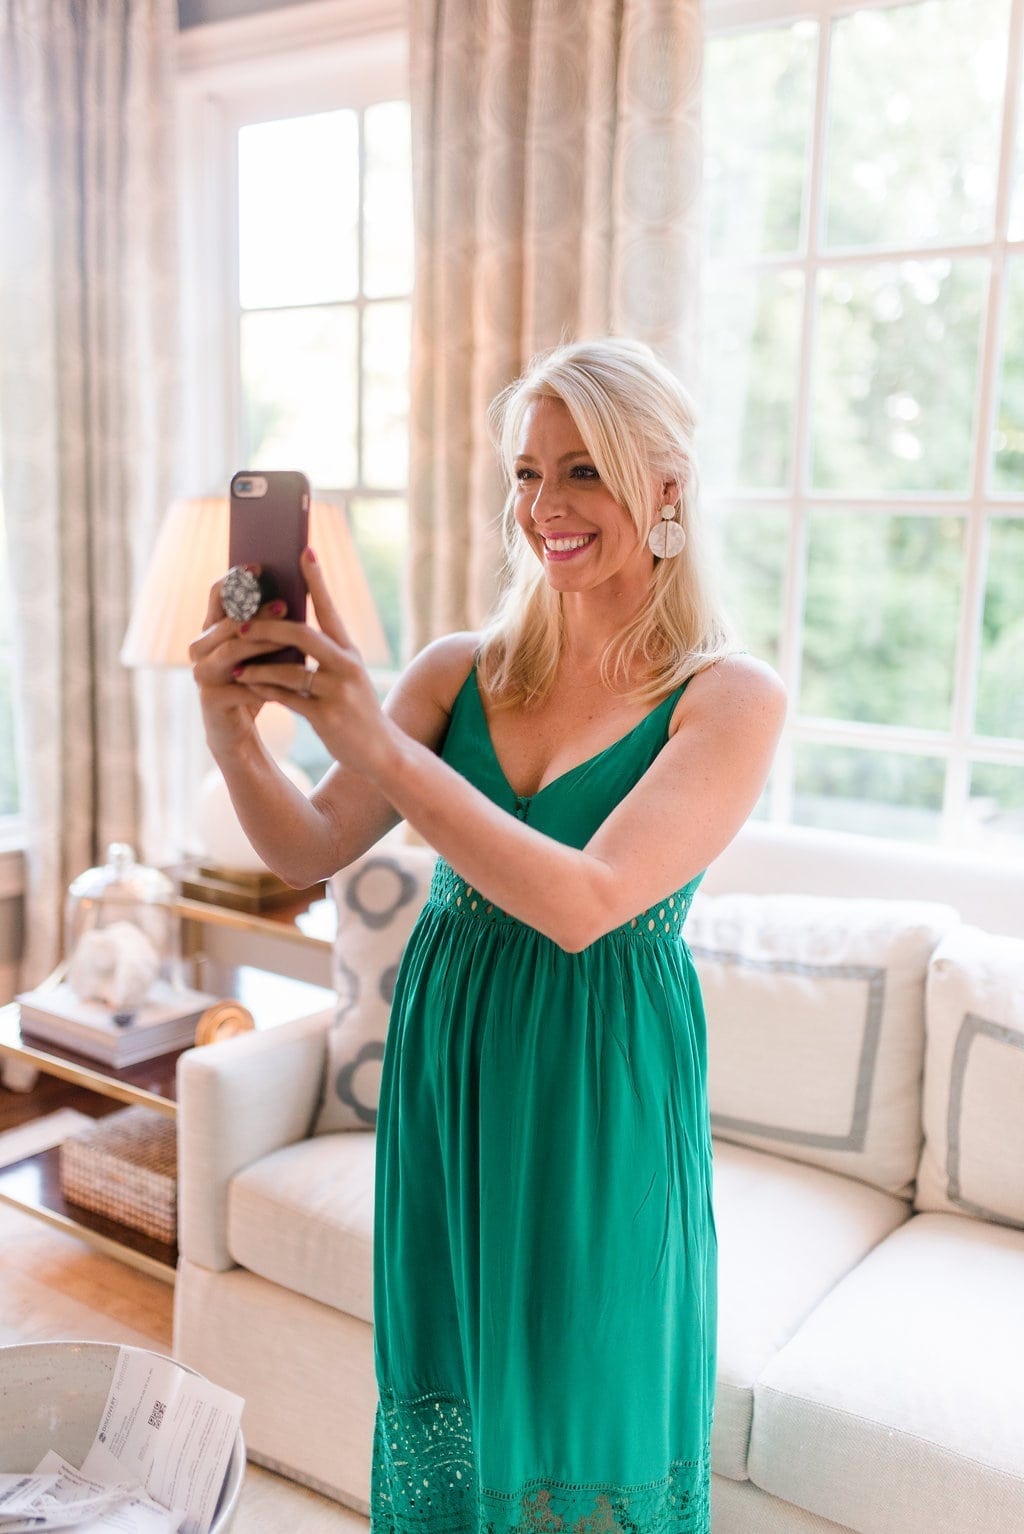 Know how to take a good selfie! Tips to take better selfies and pictures of yourself!